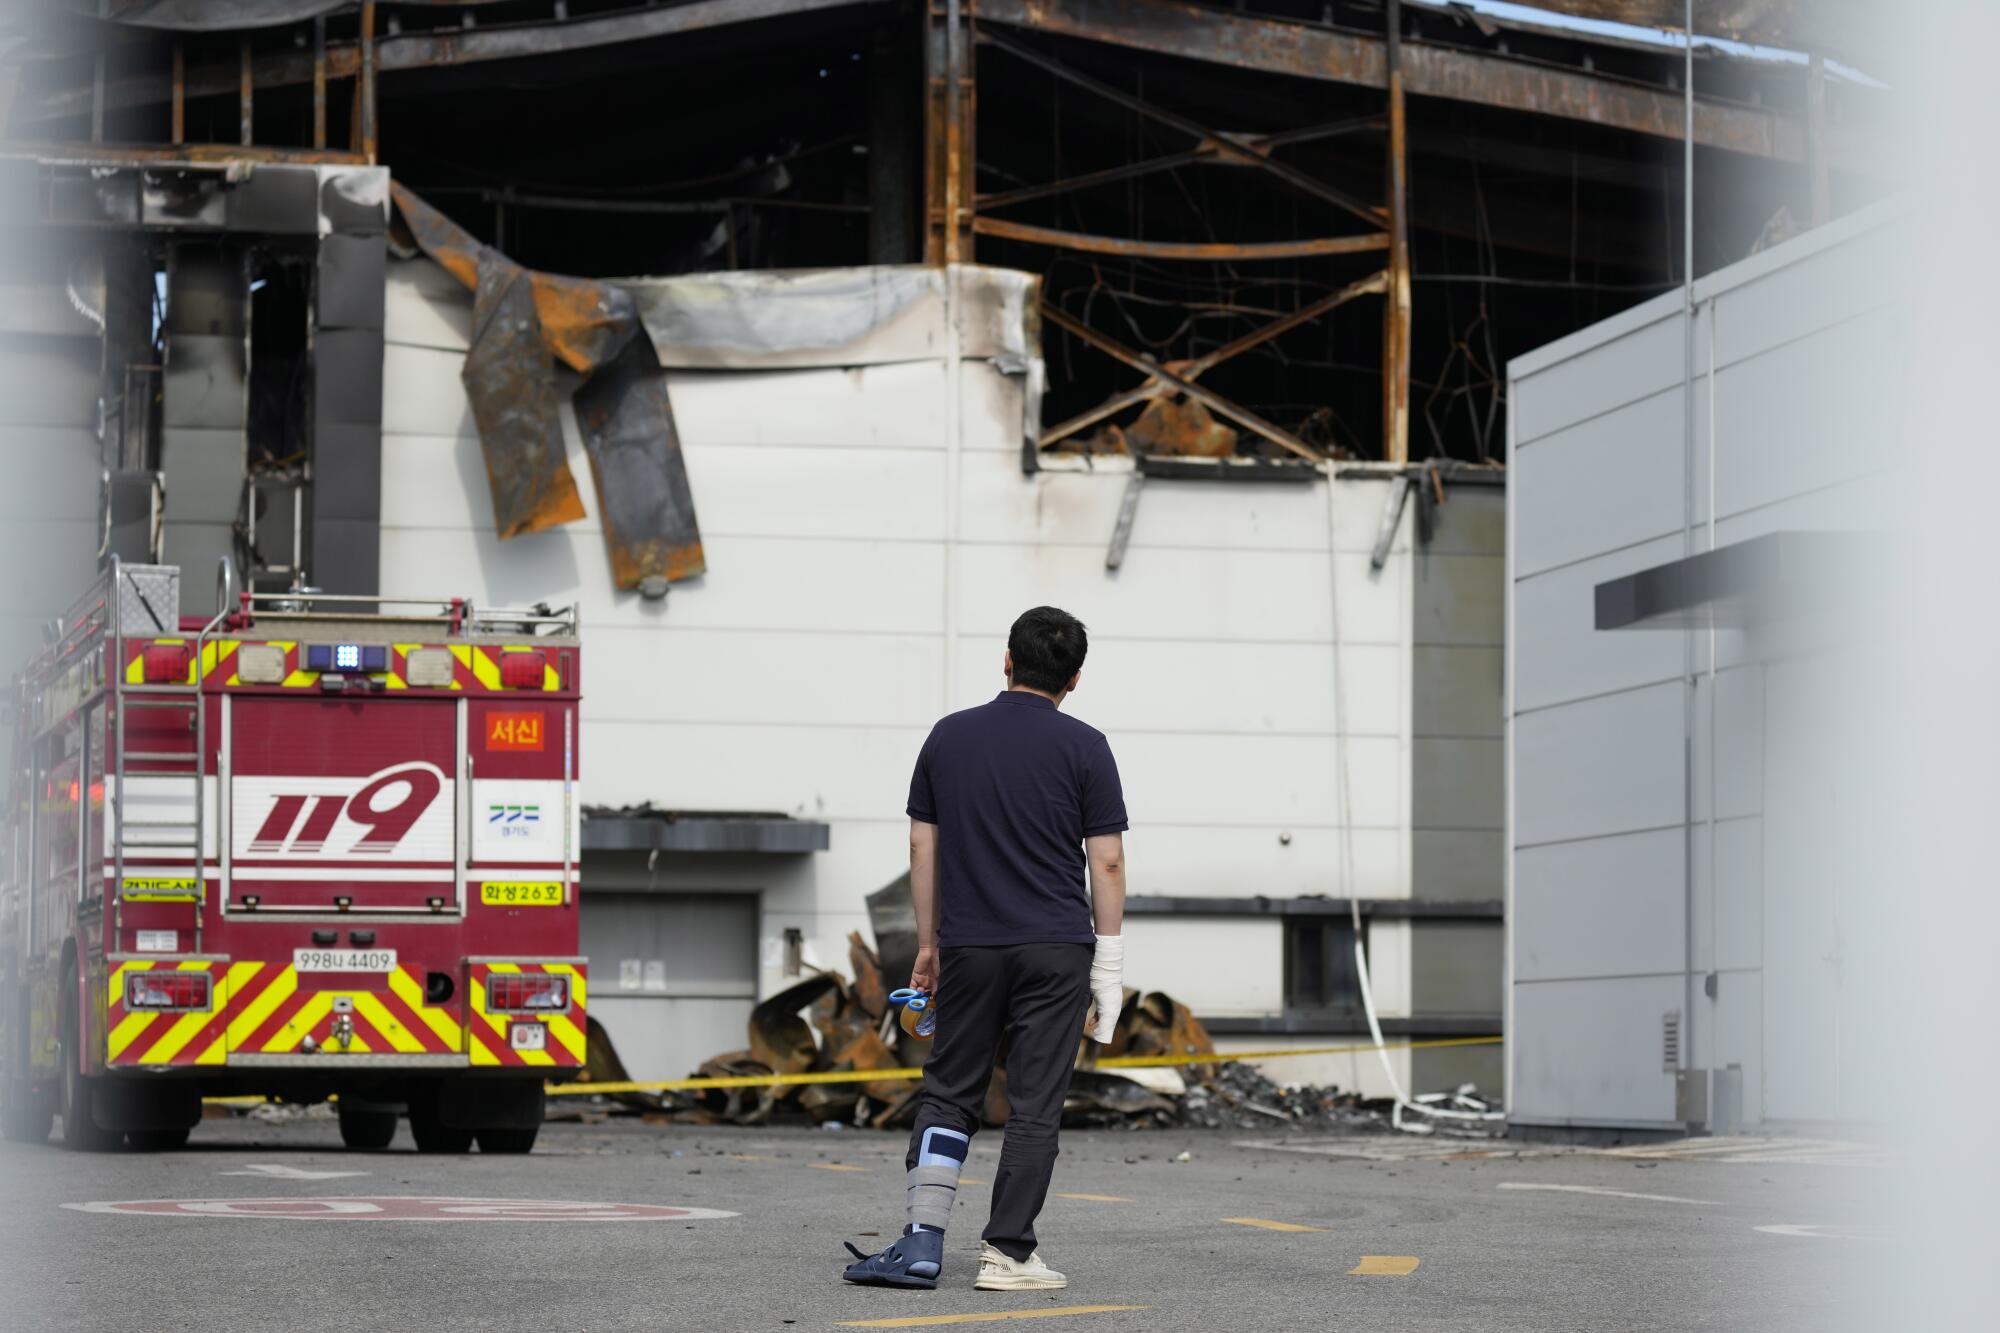 A man with an injured leg looks at a building with a fire truck parked in front.